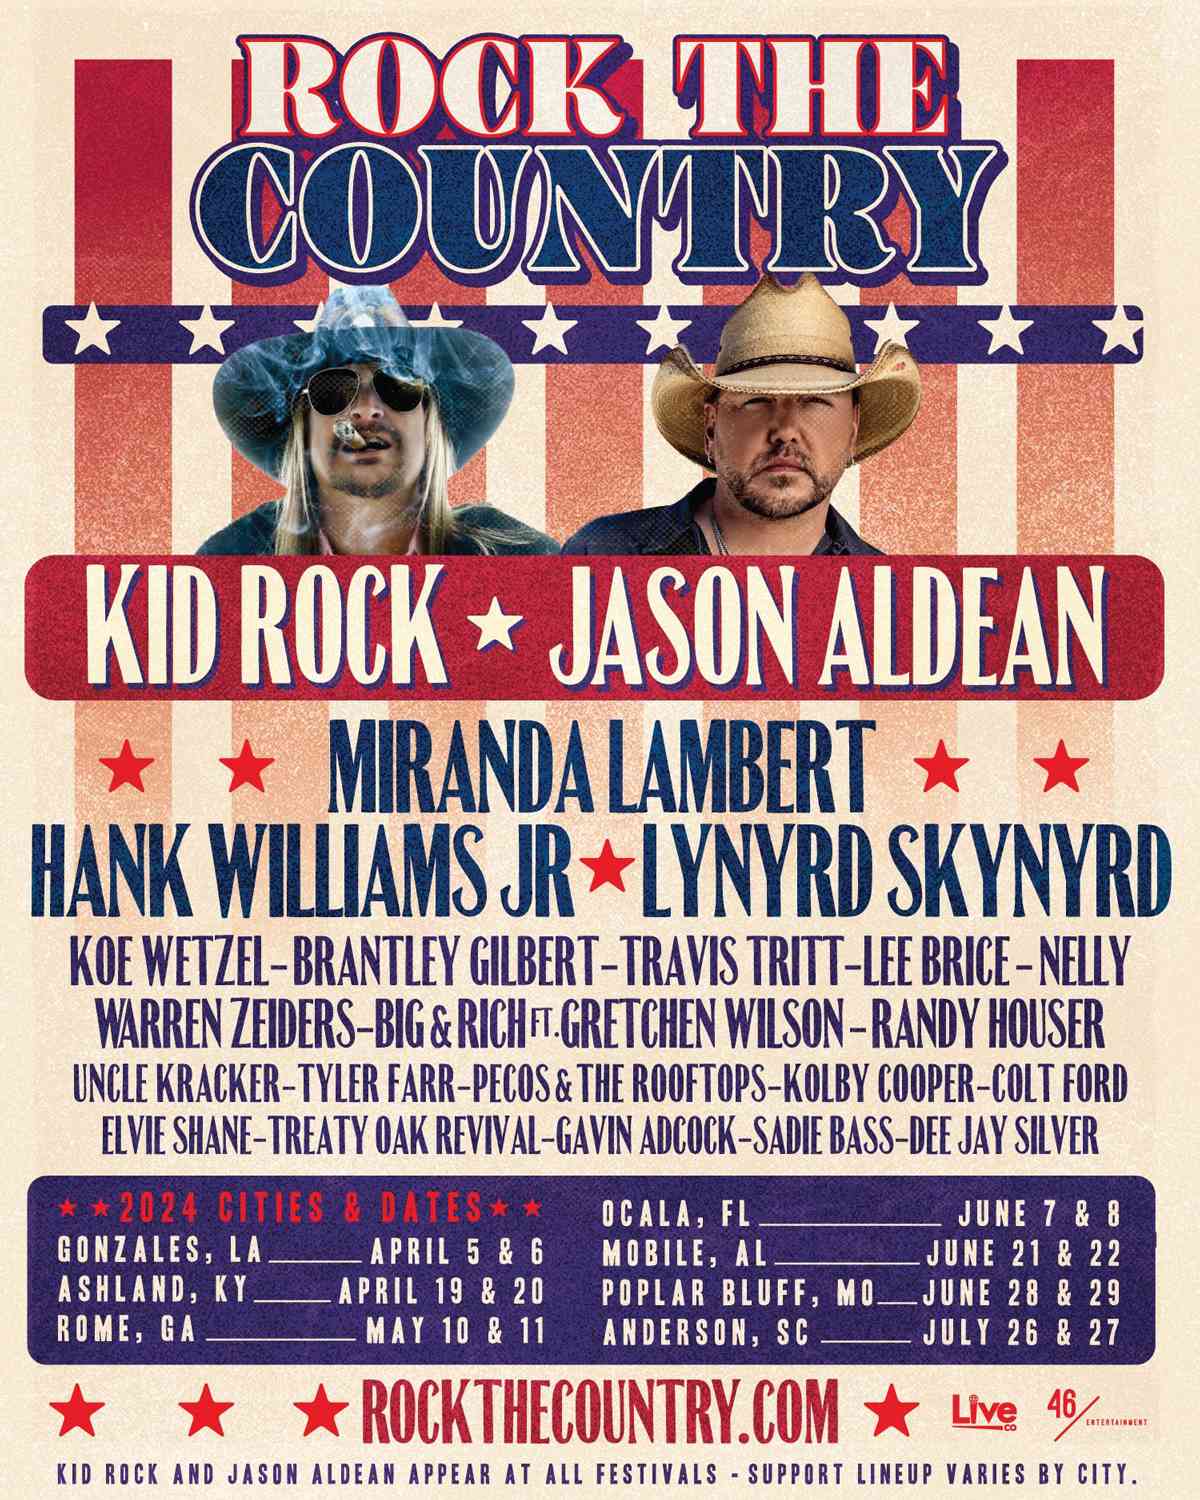 Jason Aldean and Kid Rock's "Rock the Country" tour poster.